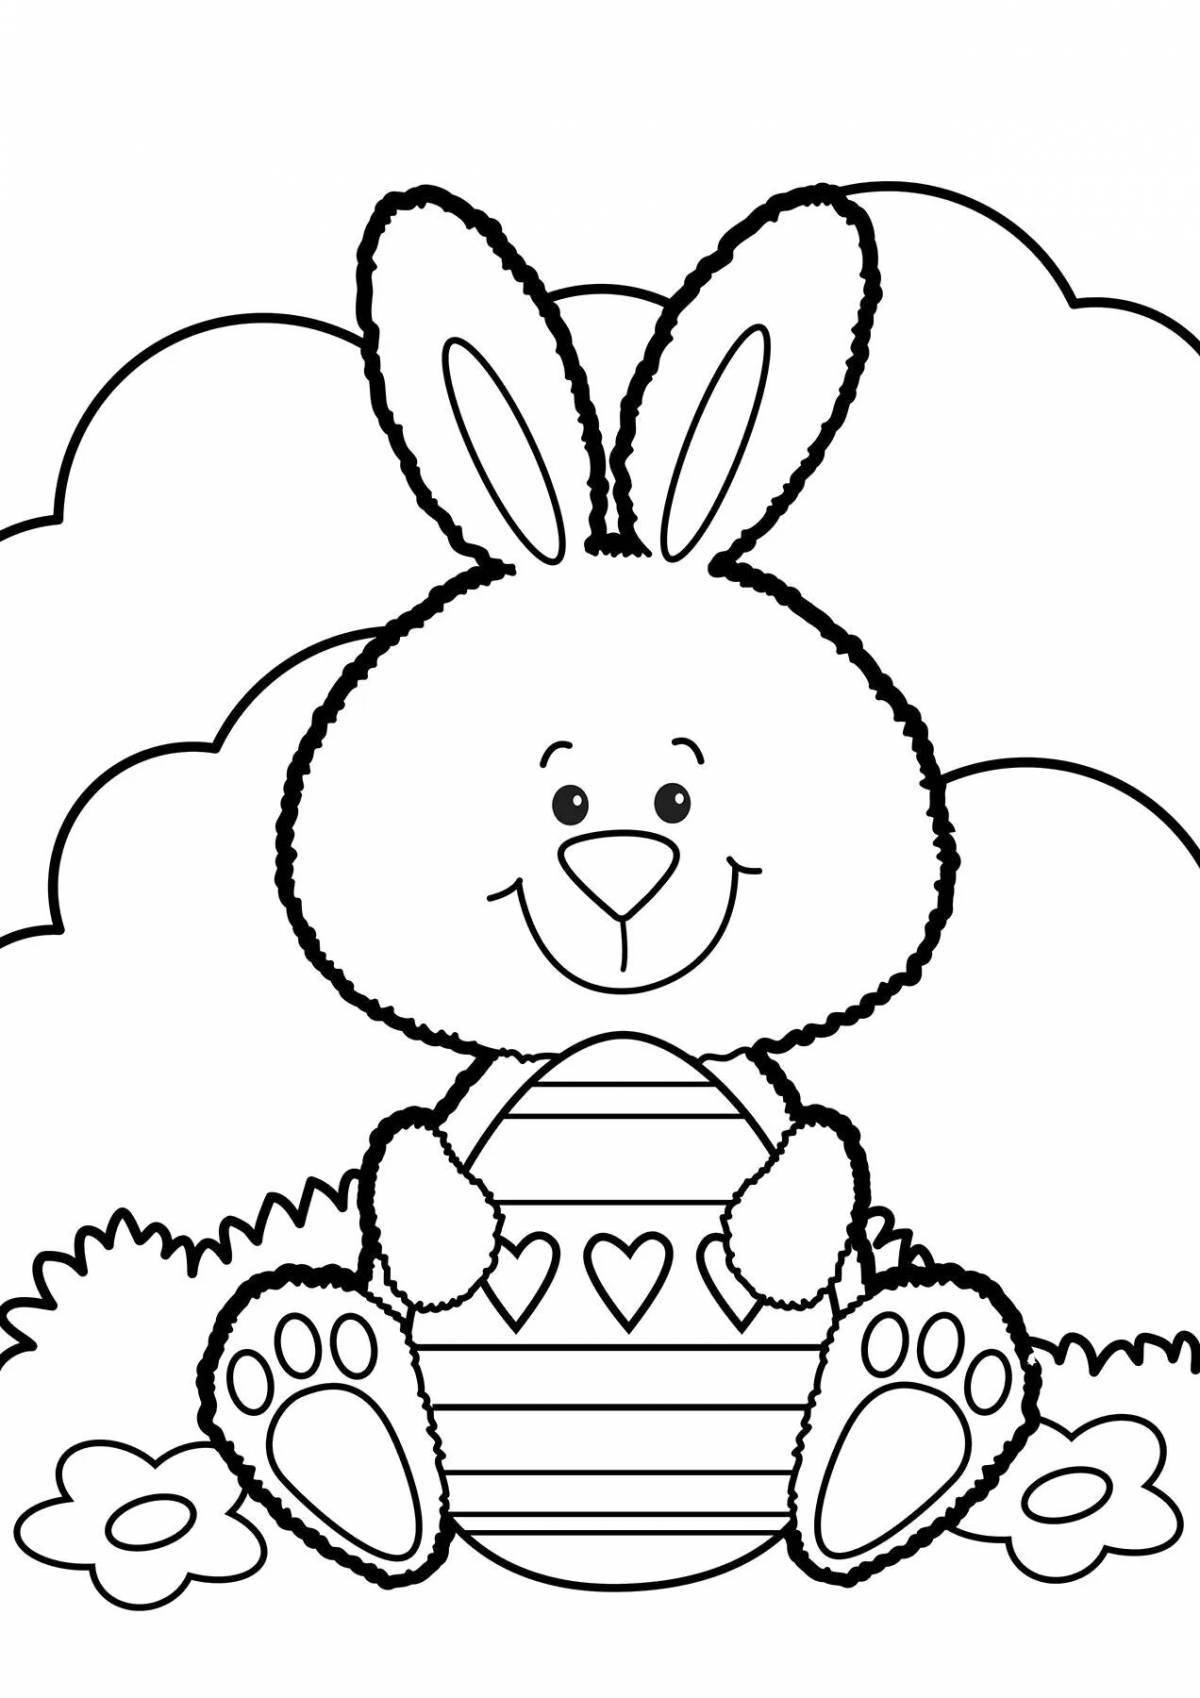 Funny bunny coloring book with a heart